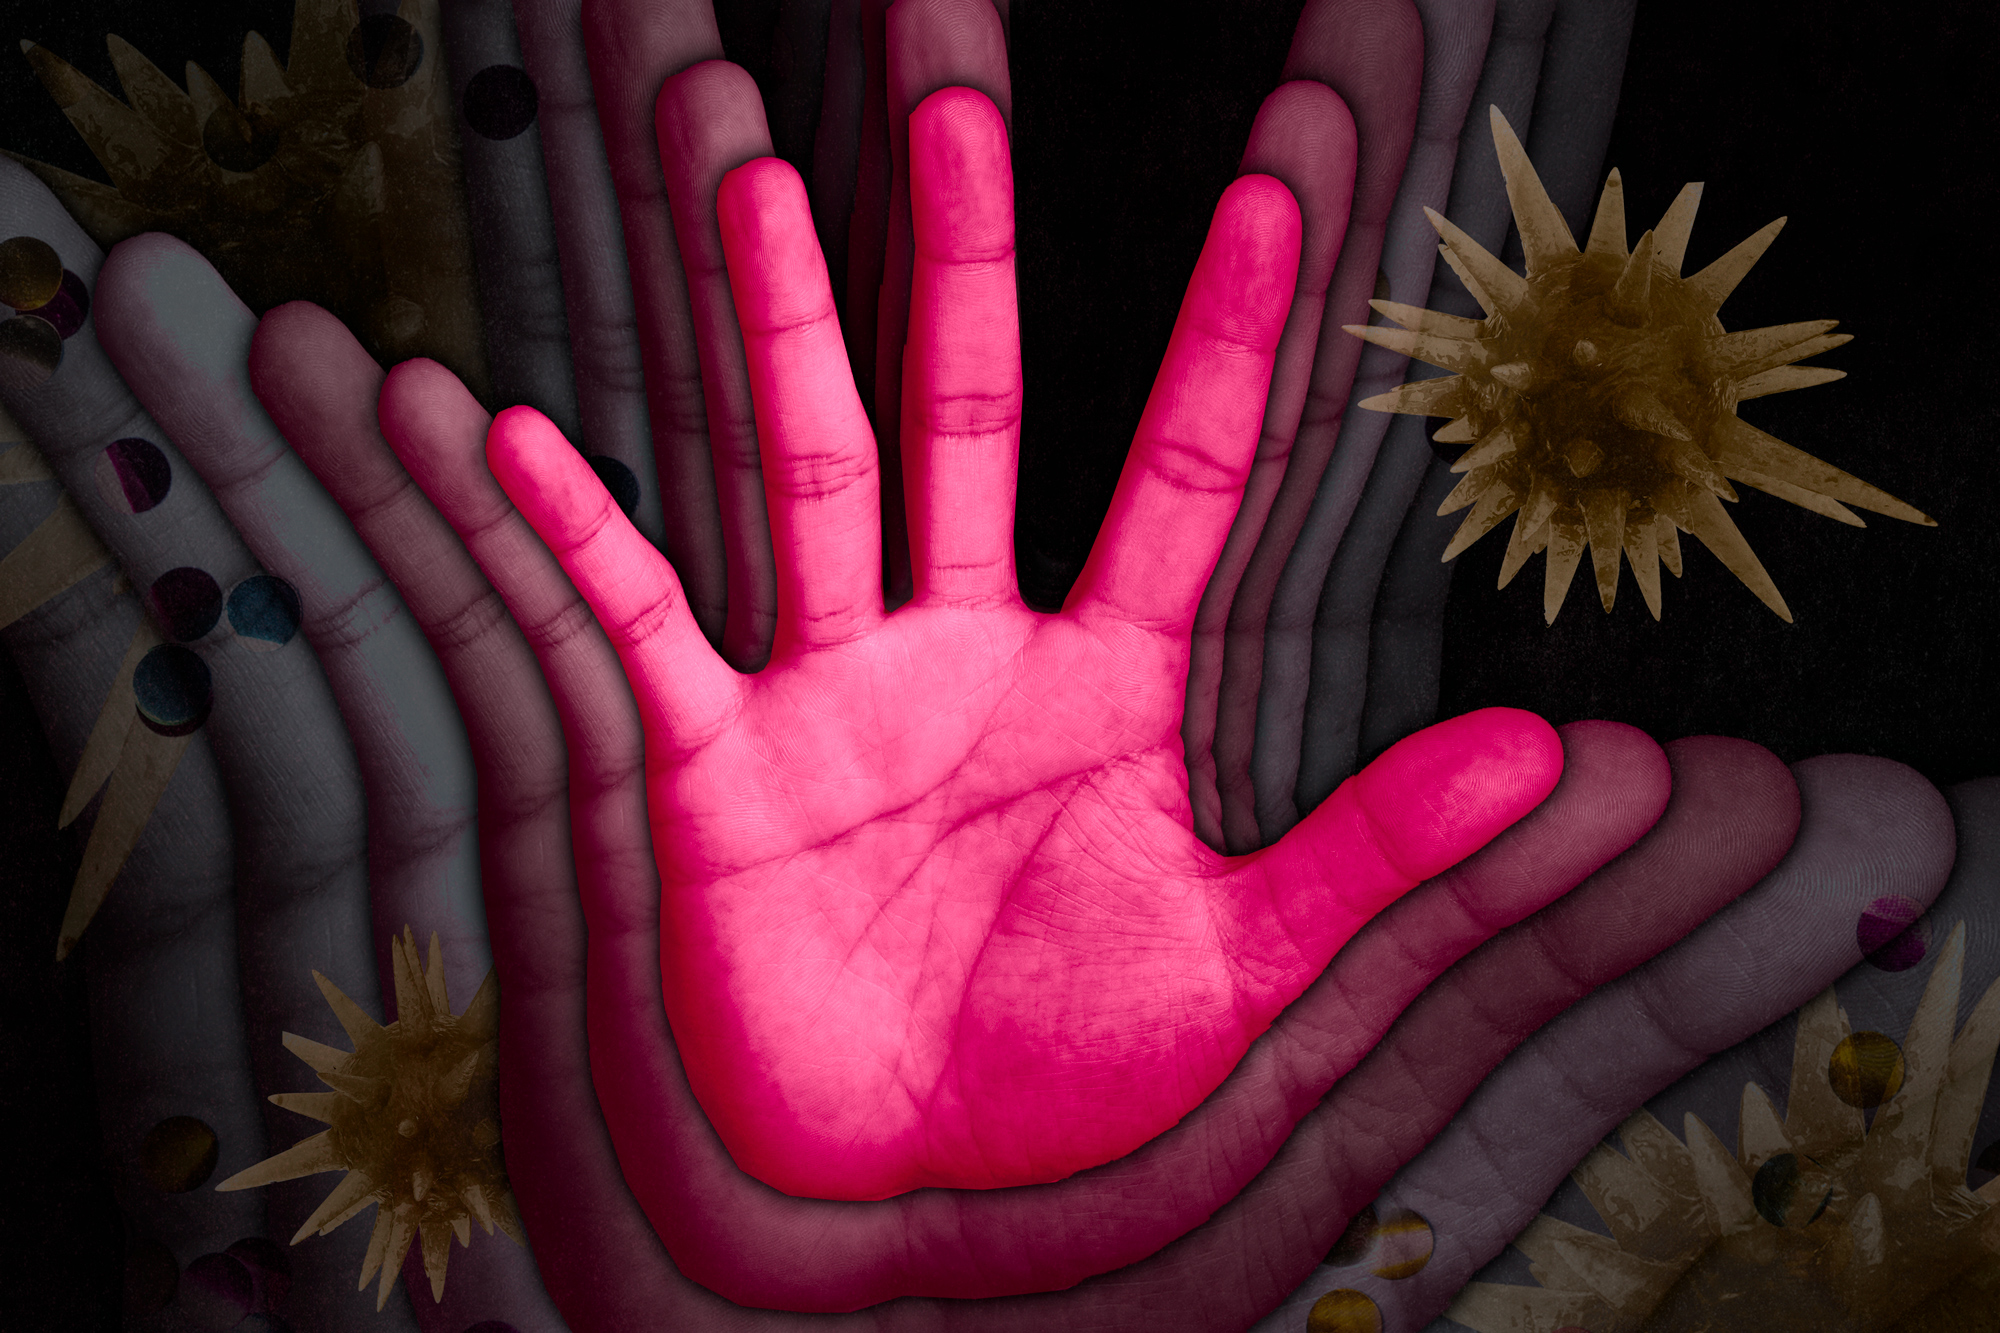 A hand with motion blur around it to suggest it's waving is surrounded by large spiky virus particles